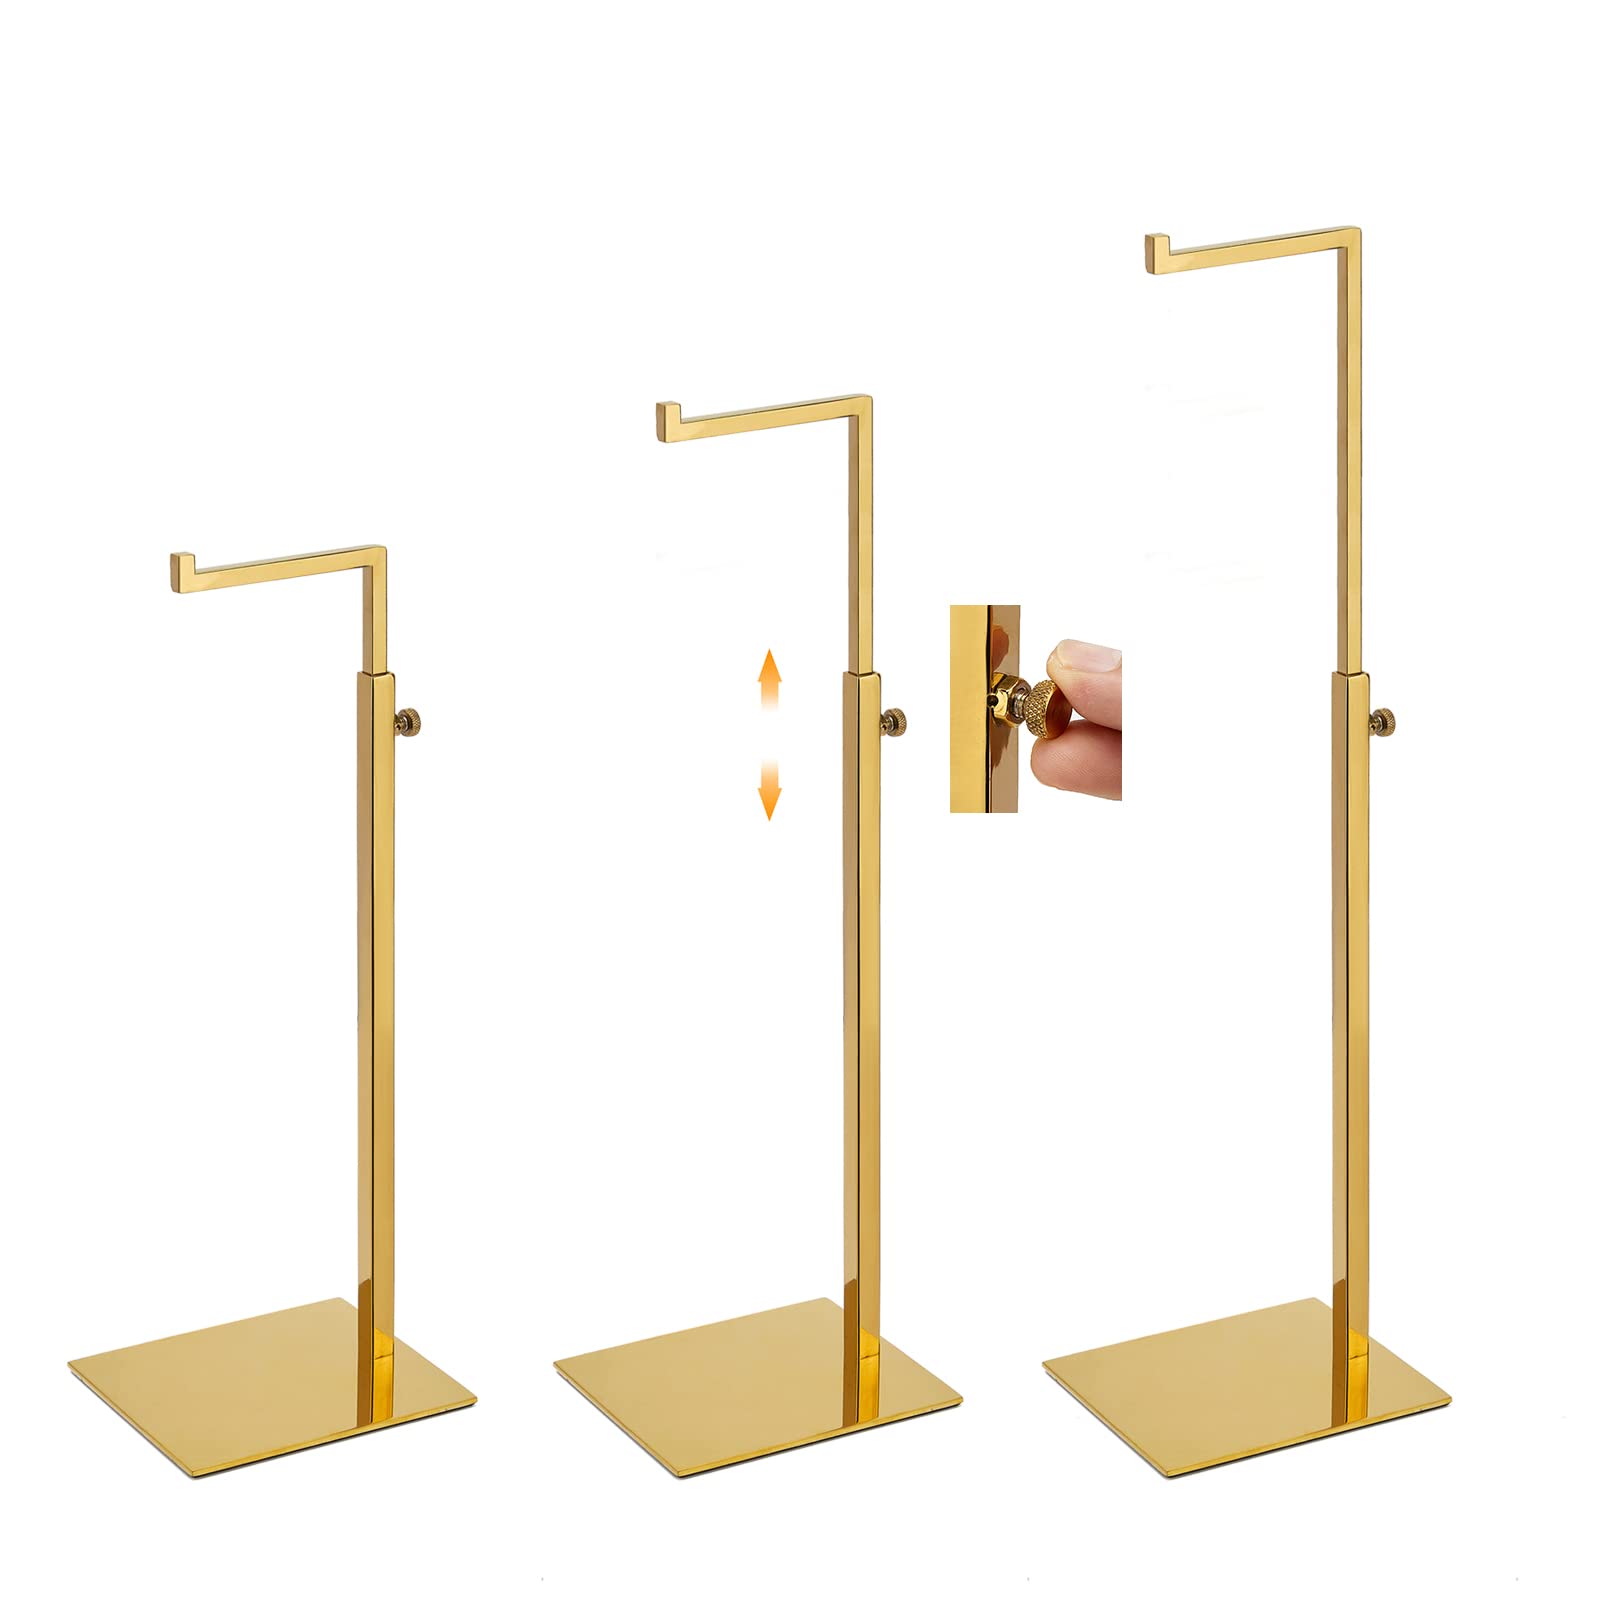 Gold Purse Display Stand 